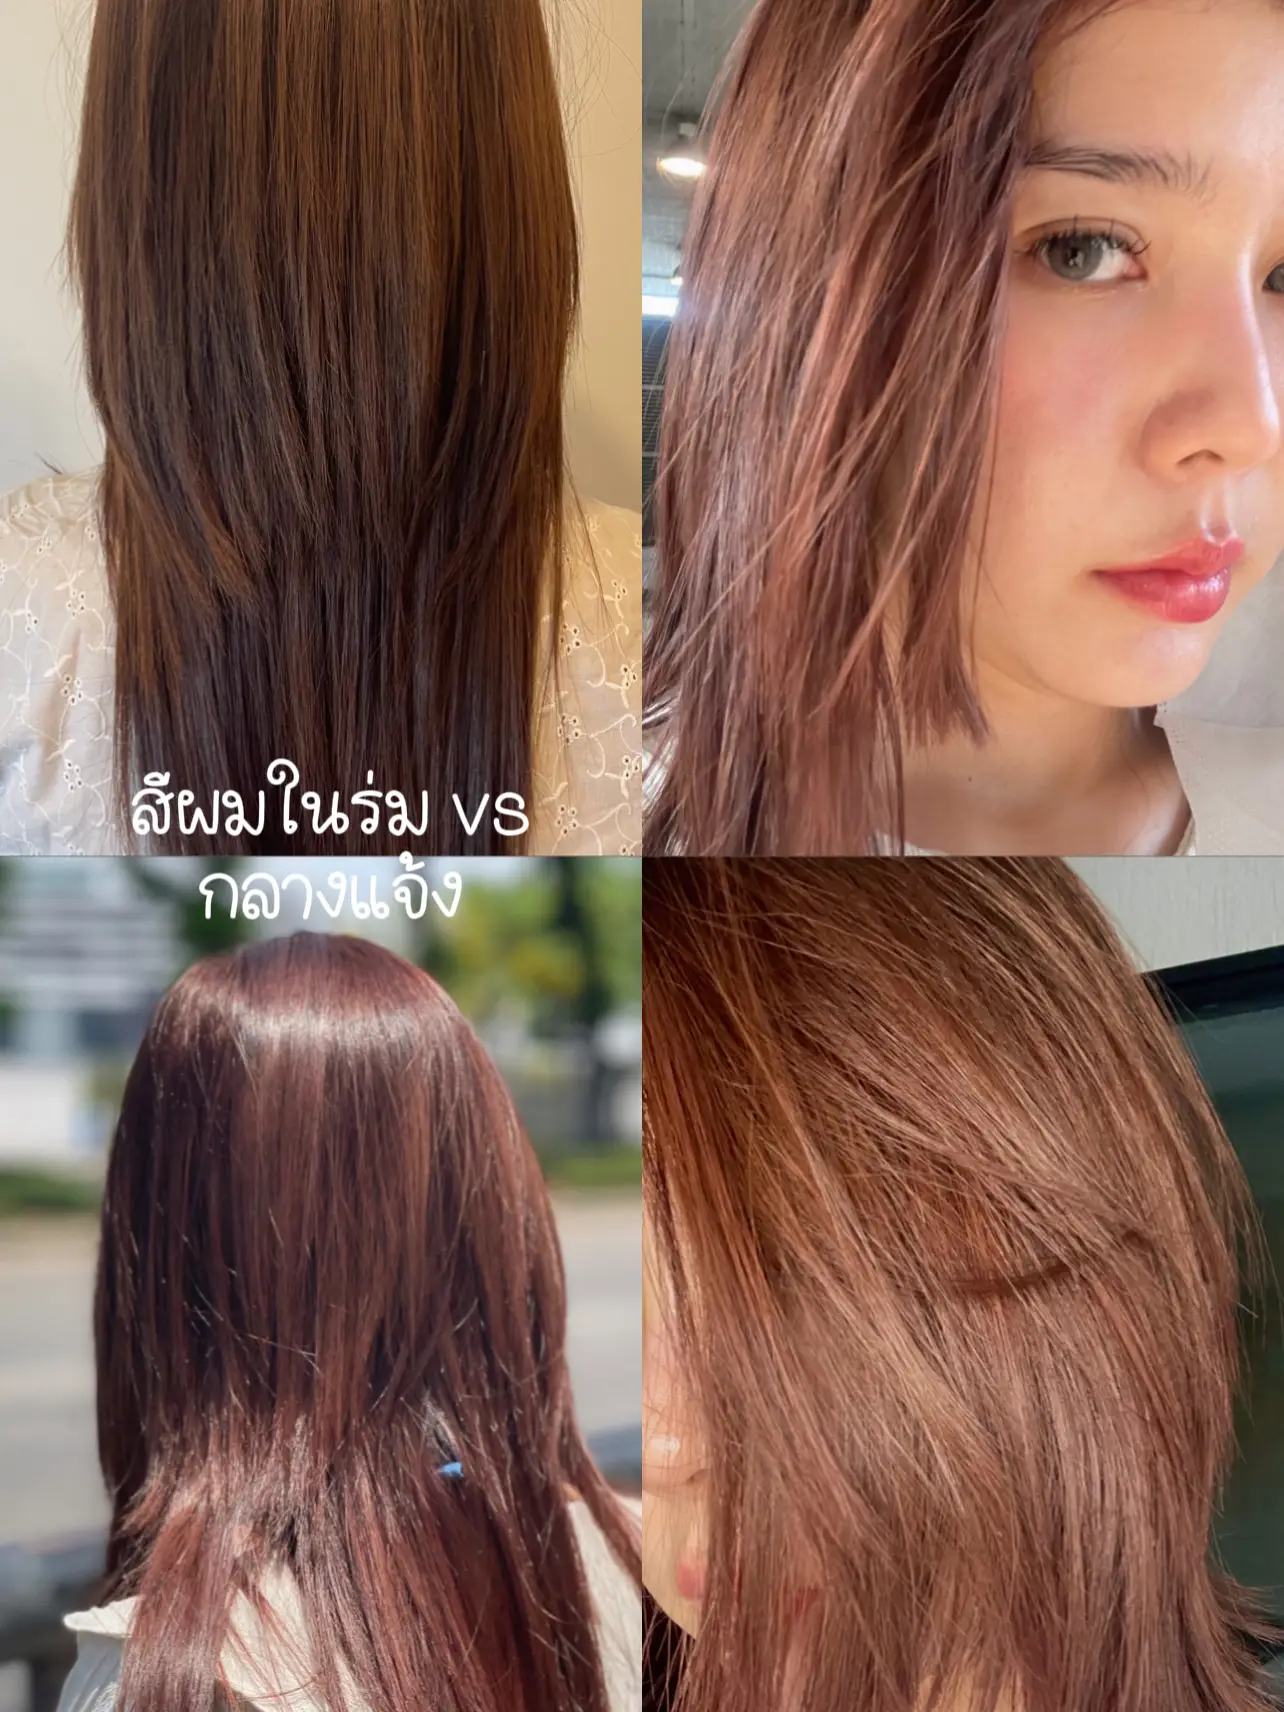 You Too Can Try Out The Copper Hair Color Trend - Garnier